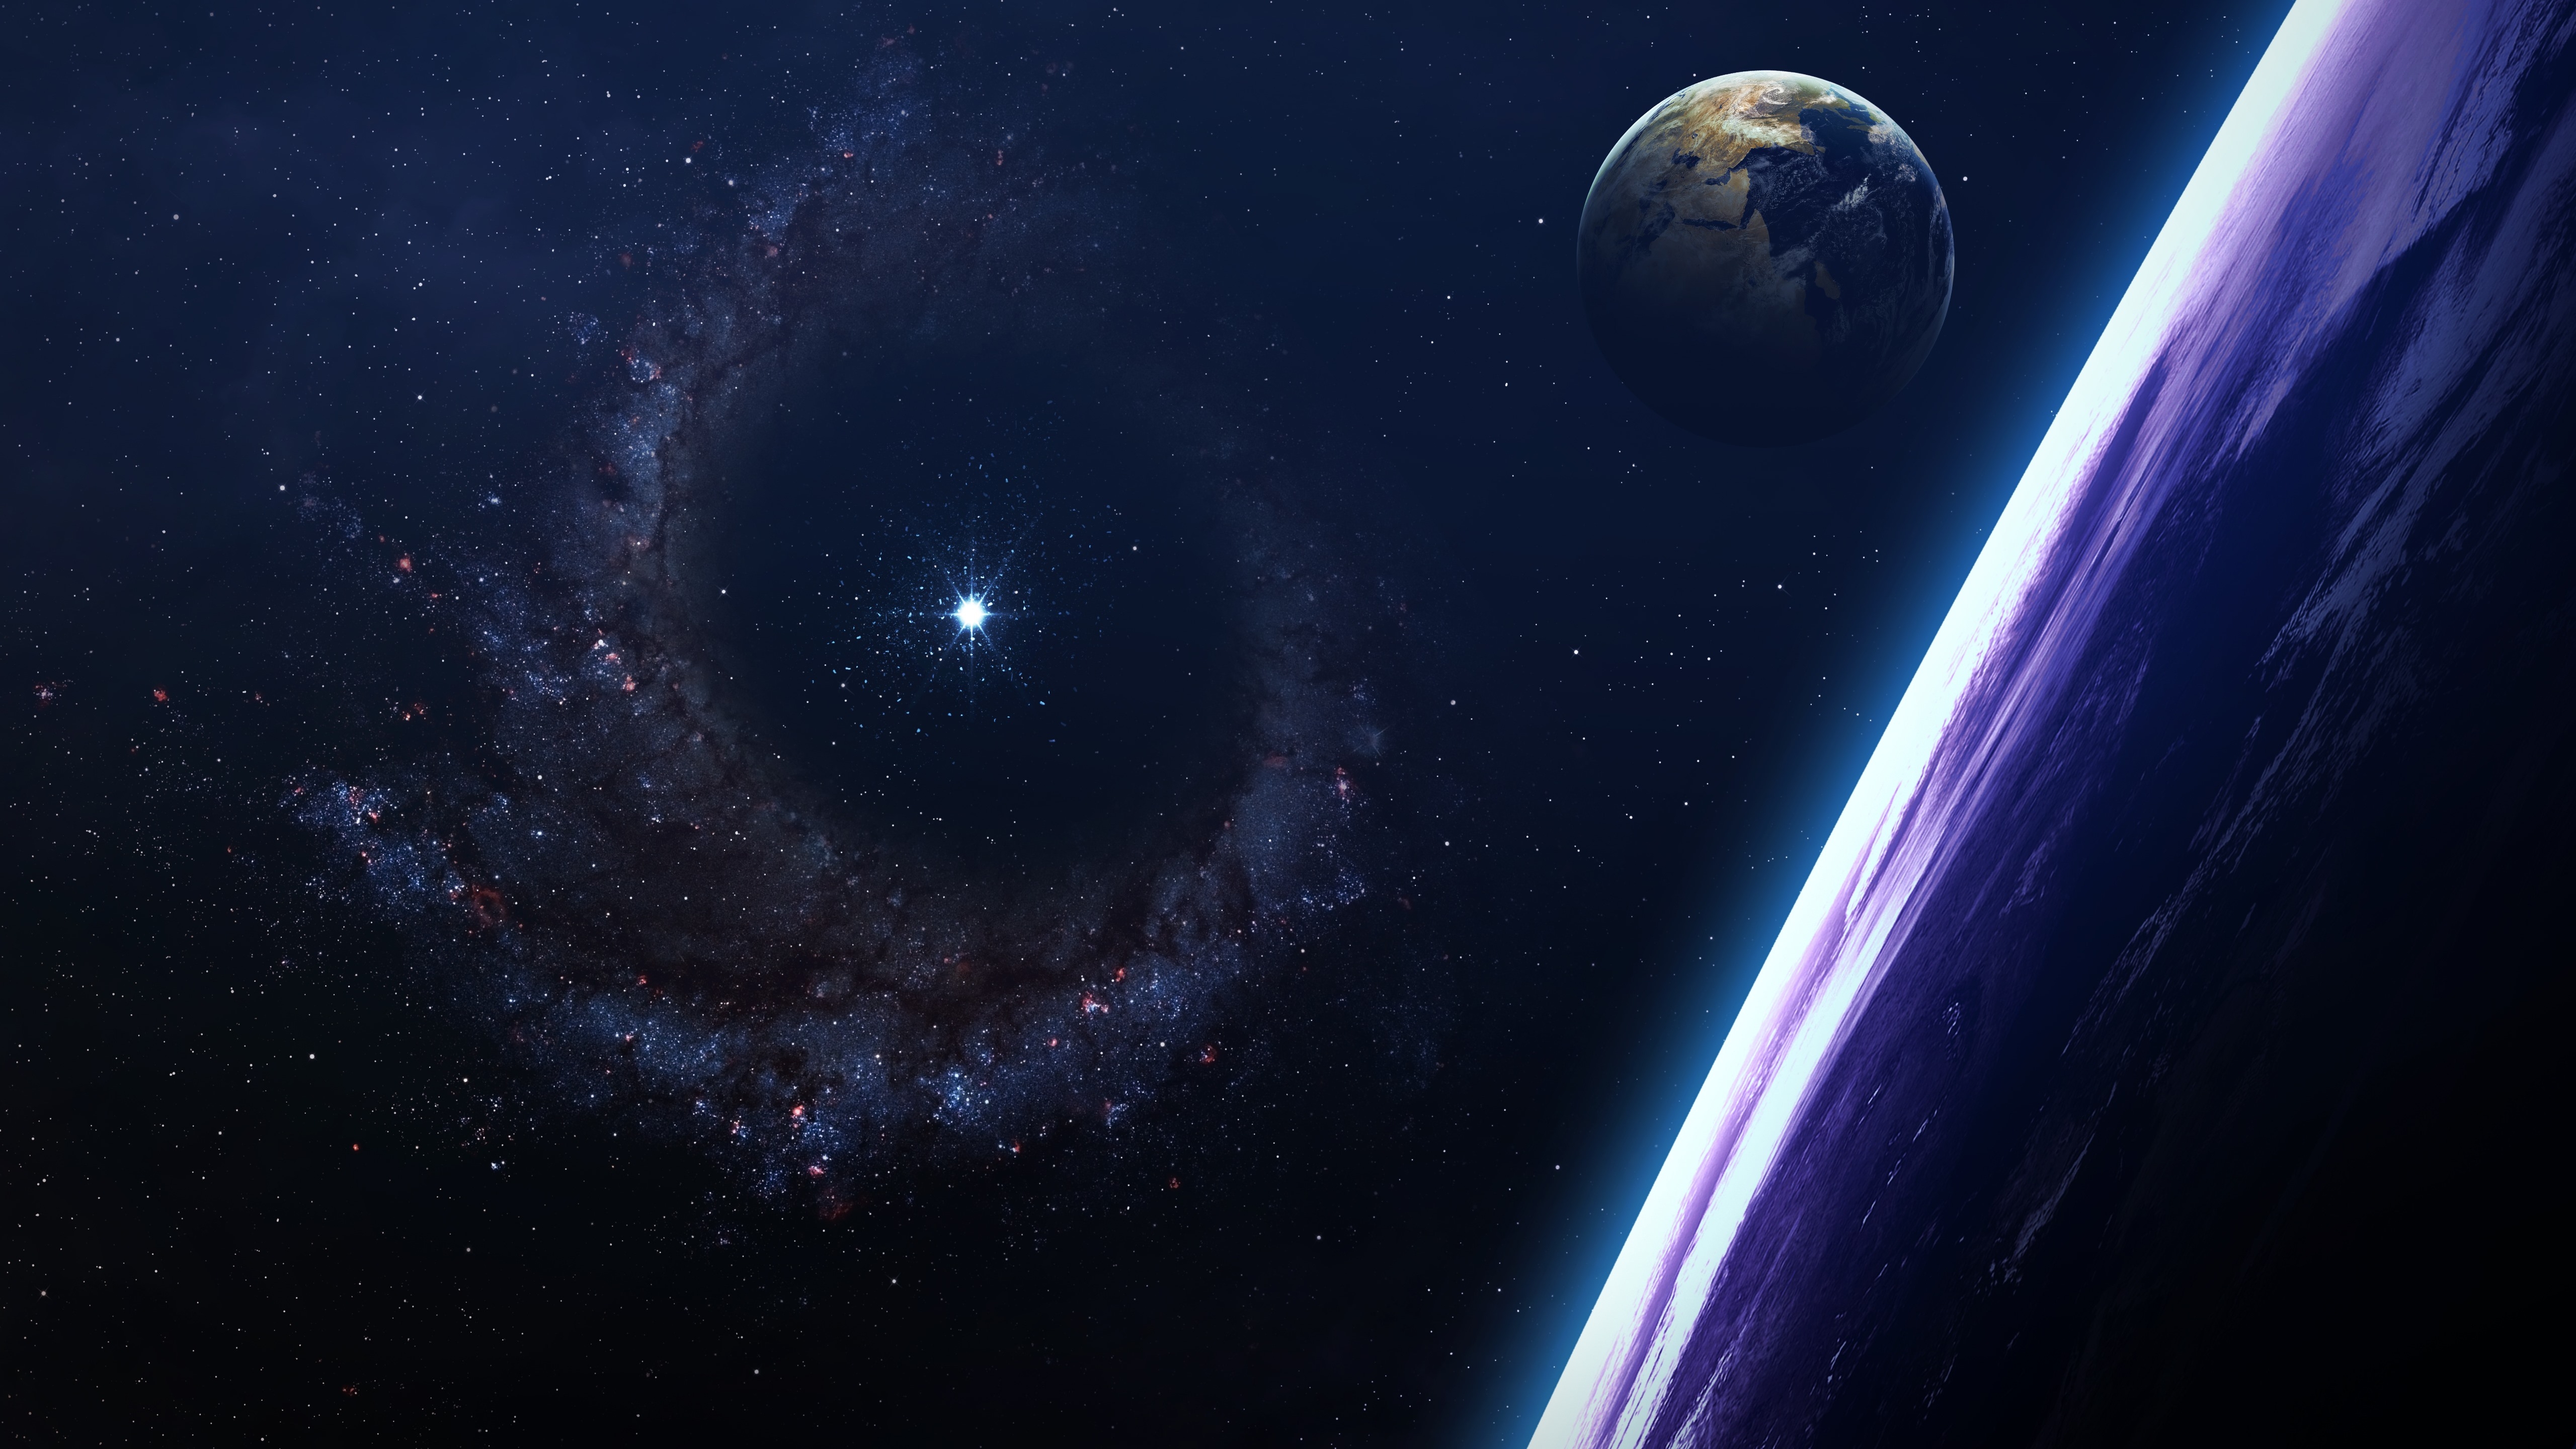 Wallpapers wallpaper outer space earth black hole on the desktop